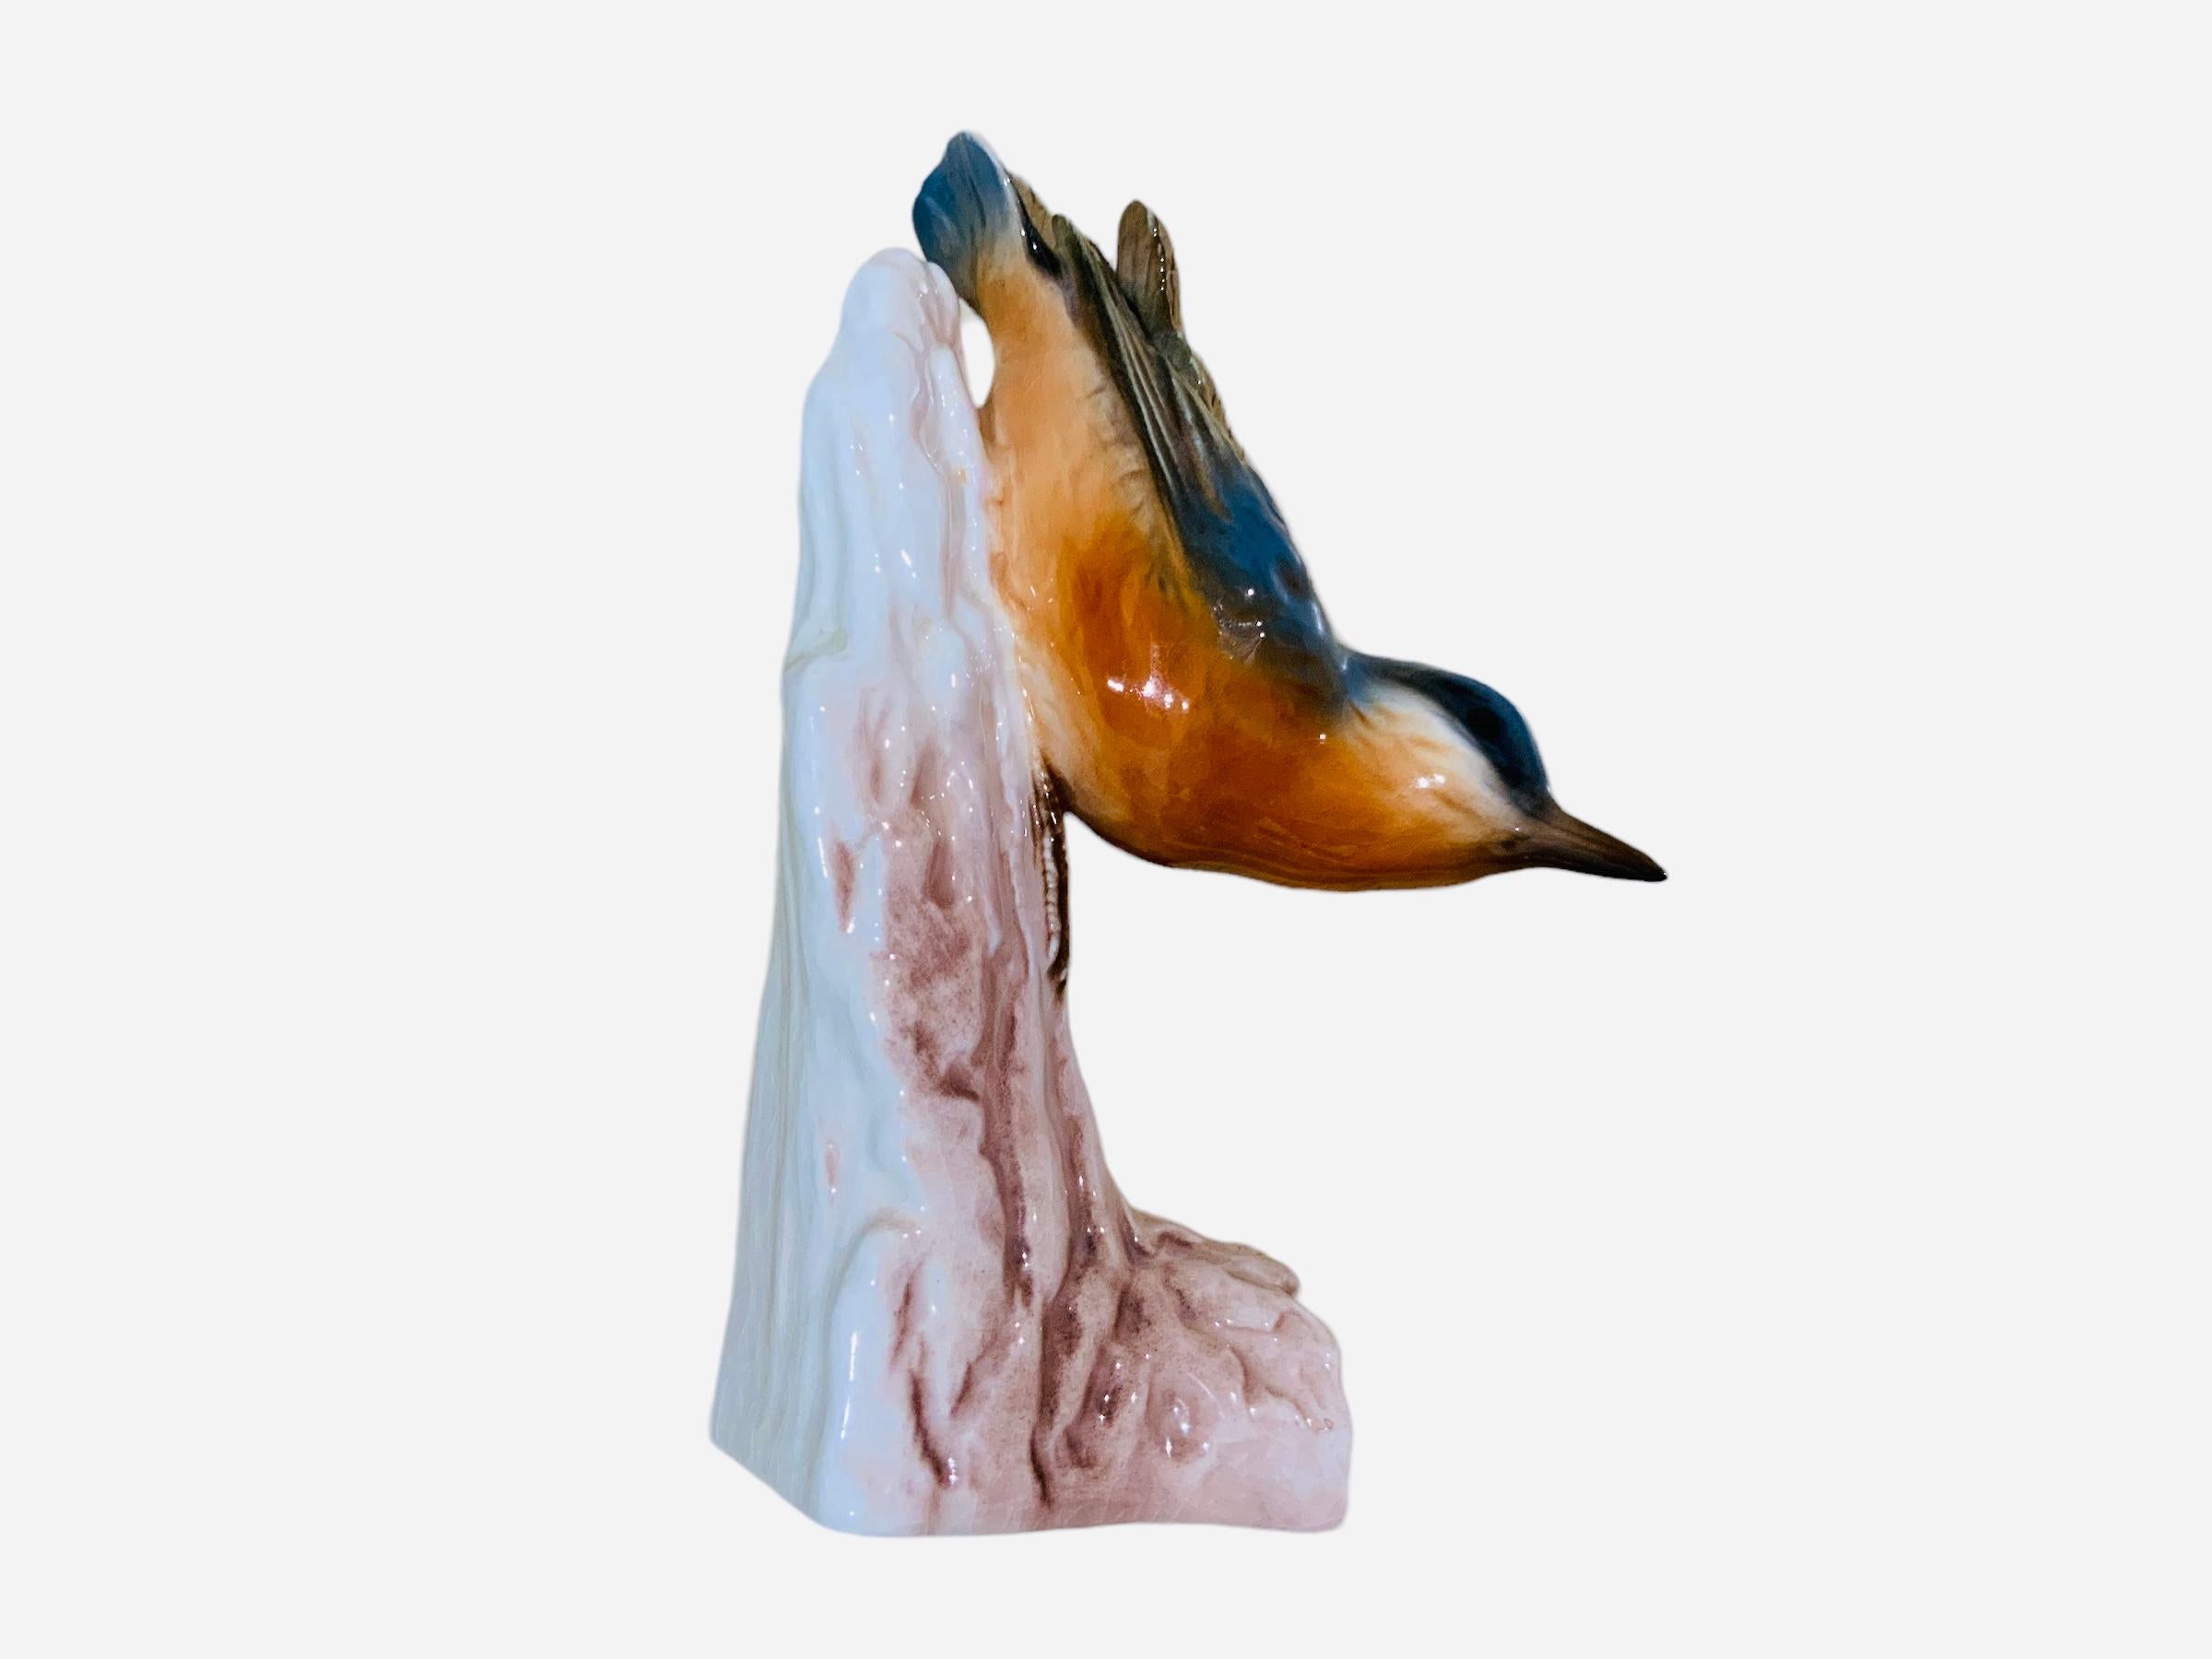 This is a Goebel porcelain figurine of a bird. It depicts a very well done hand painted Nuthatch. This colorful bird is standing over an old aged trunk. It is hallmarked Goebel, W.Germany below the base of this trunk.